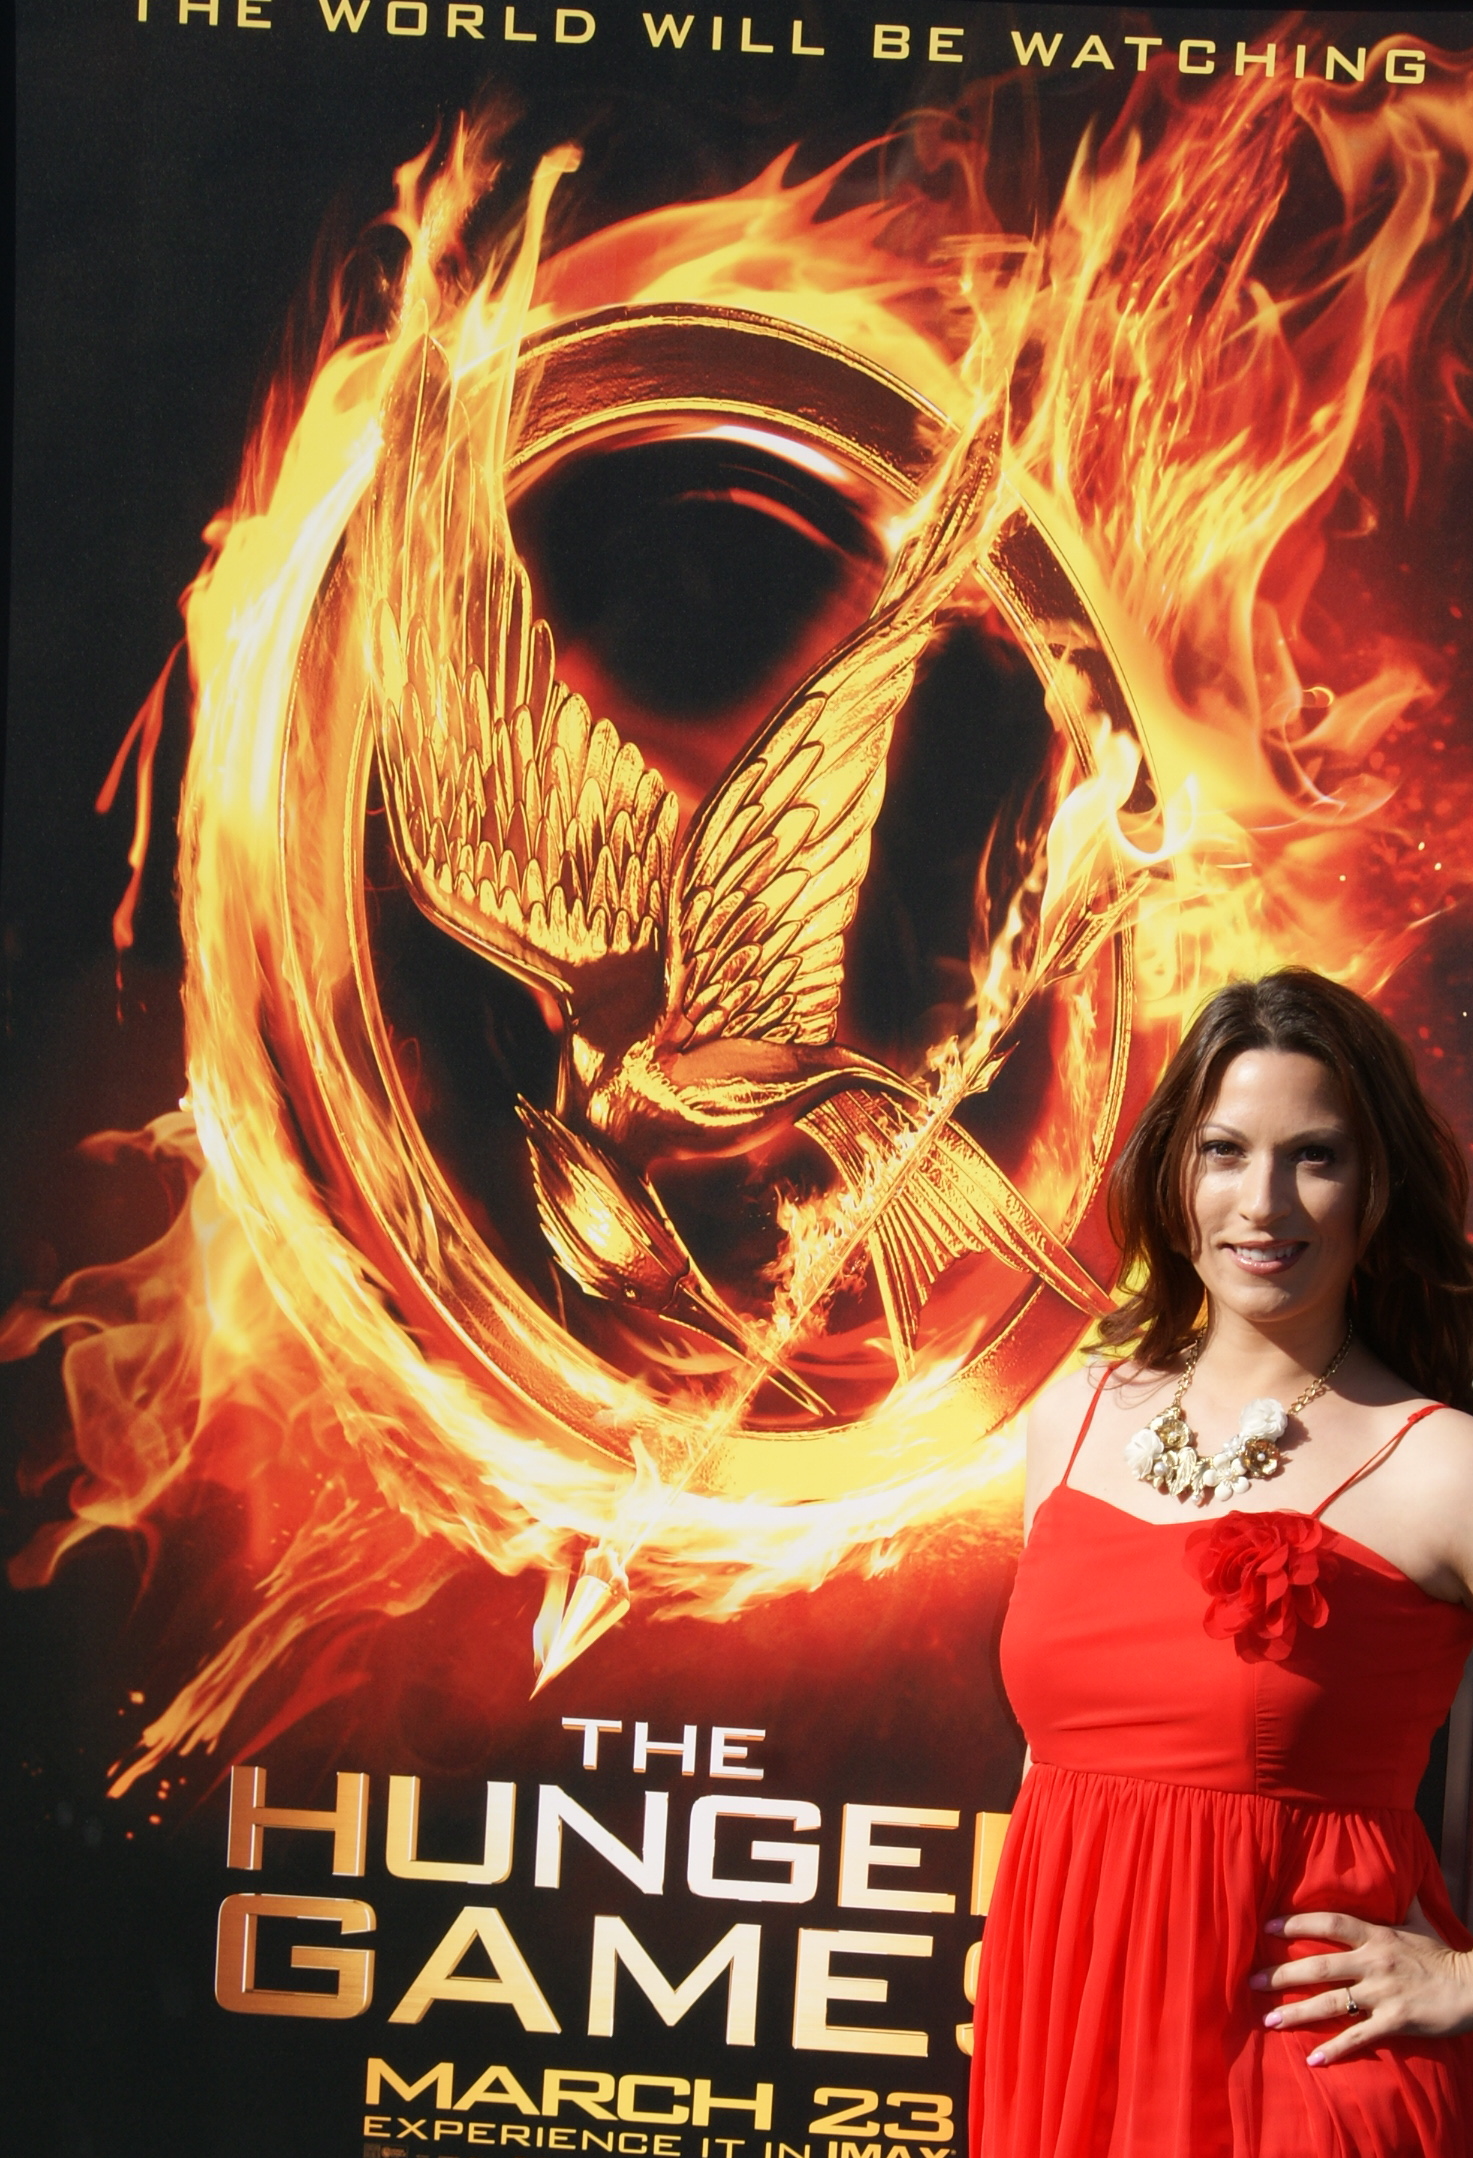 Michelle Romano at the Hollywood Premiere of 